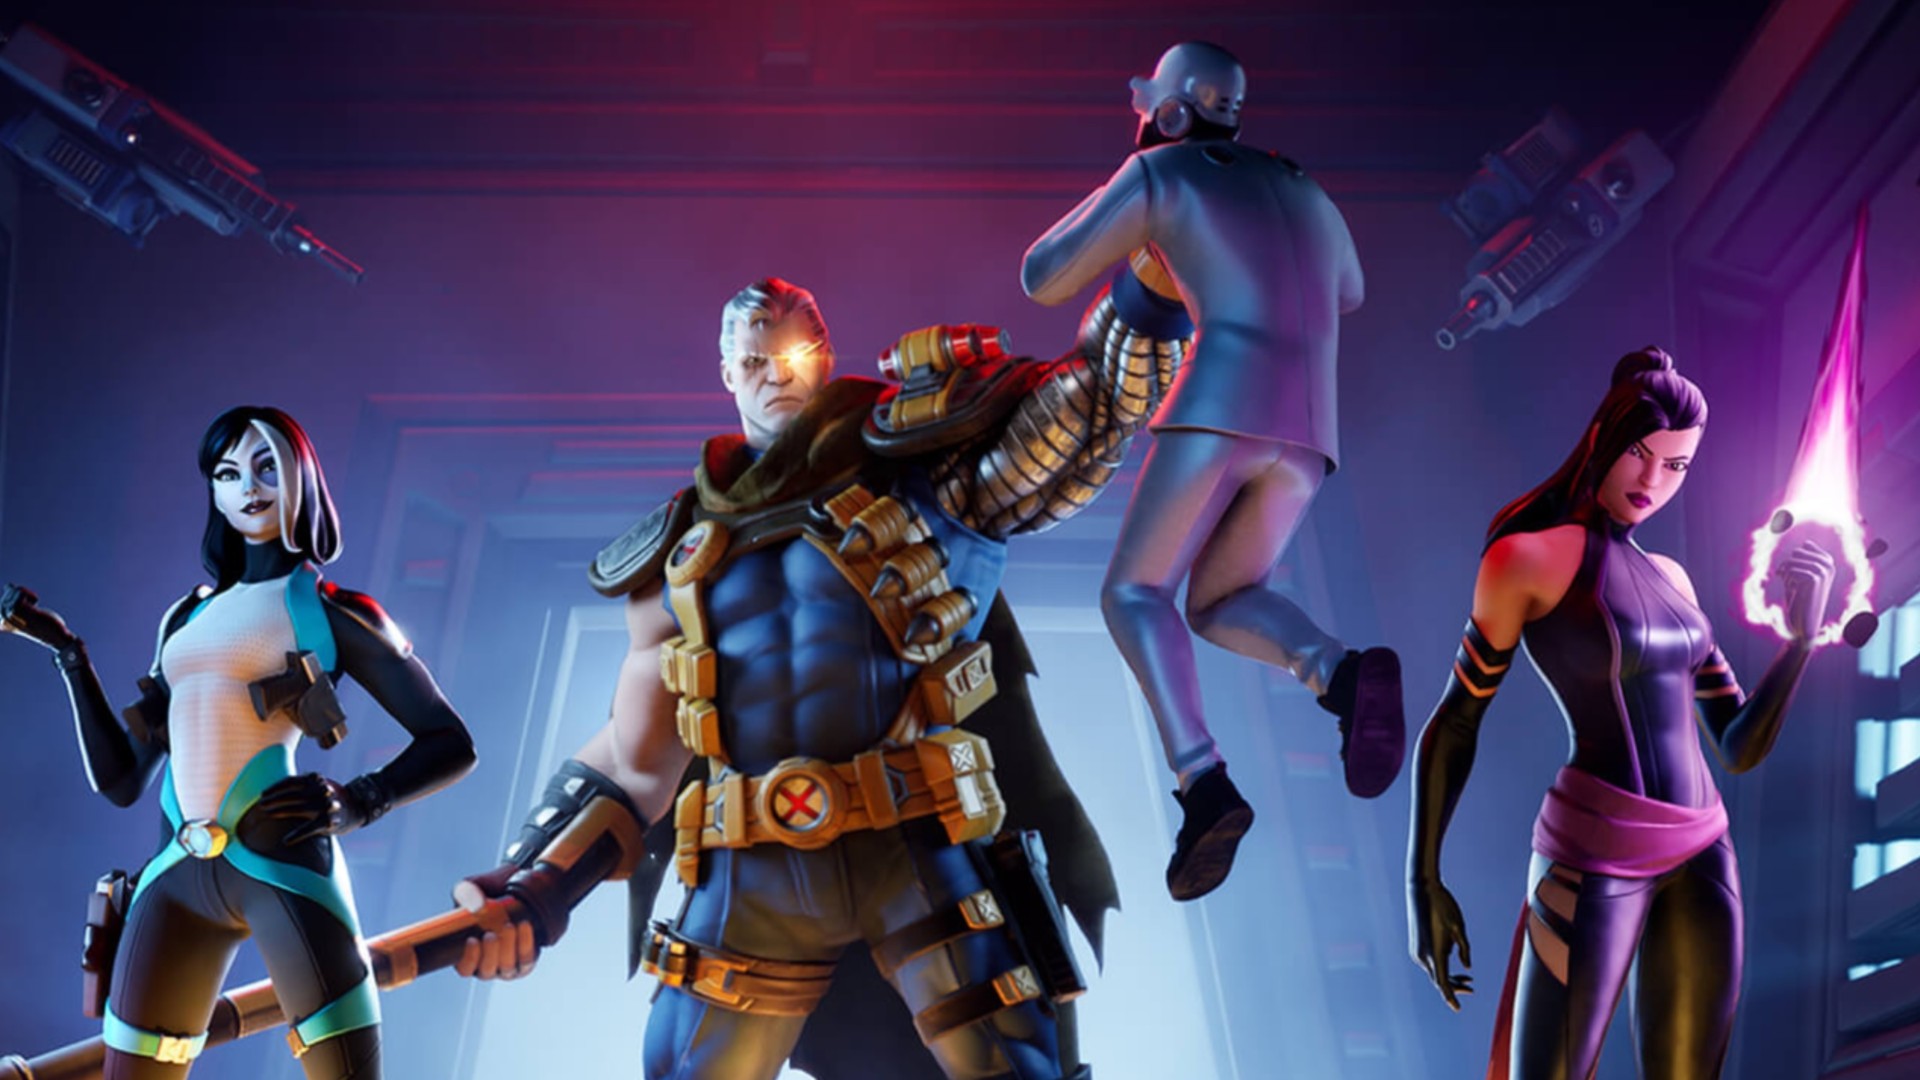 Fortnite's new X-Force bundle drops in some classic Marvel heroes